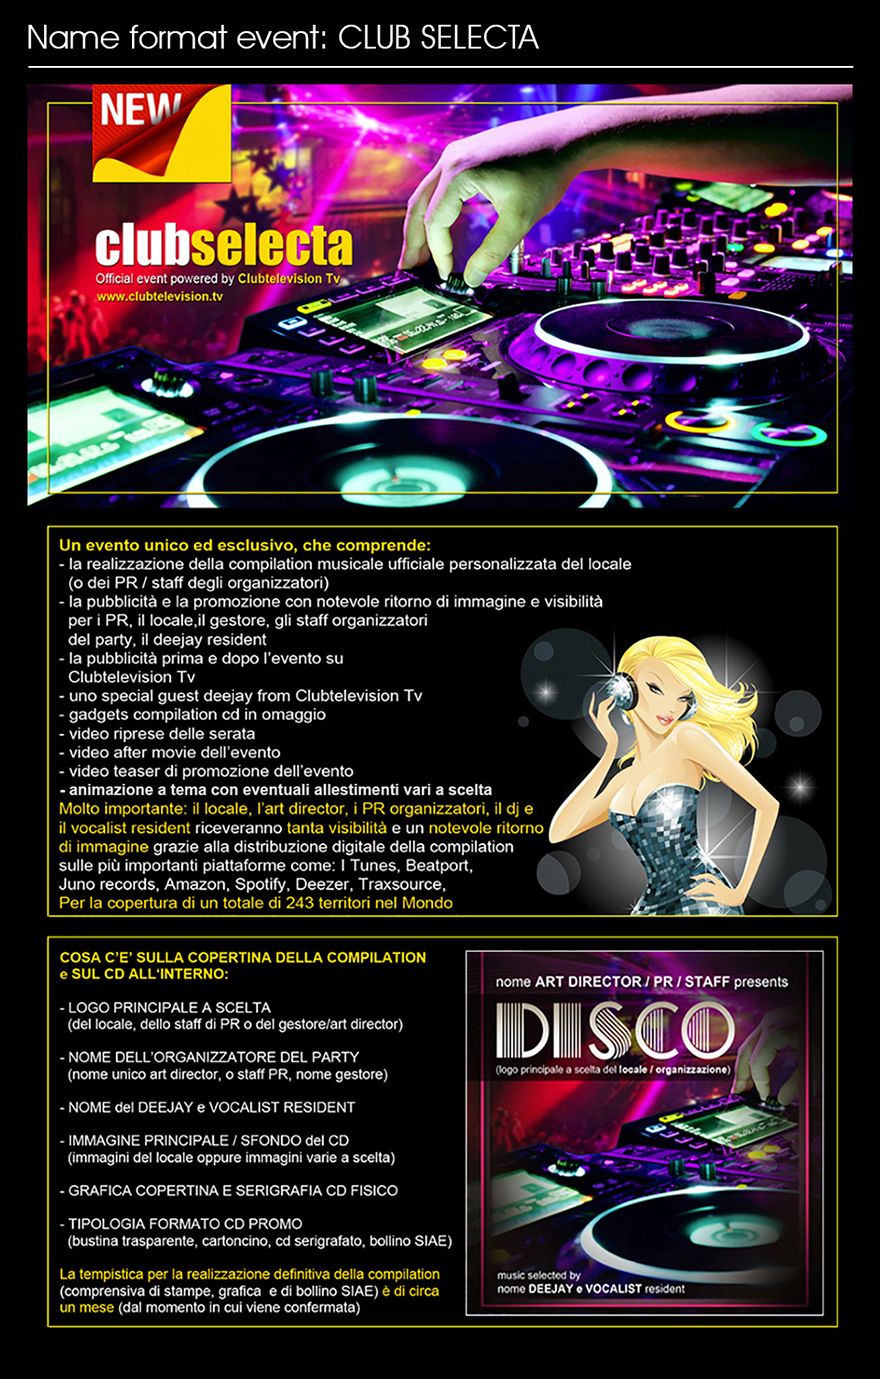 CLUB-SELECTA-PARTY-OFFICIAL